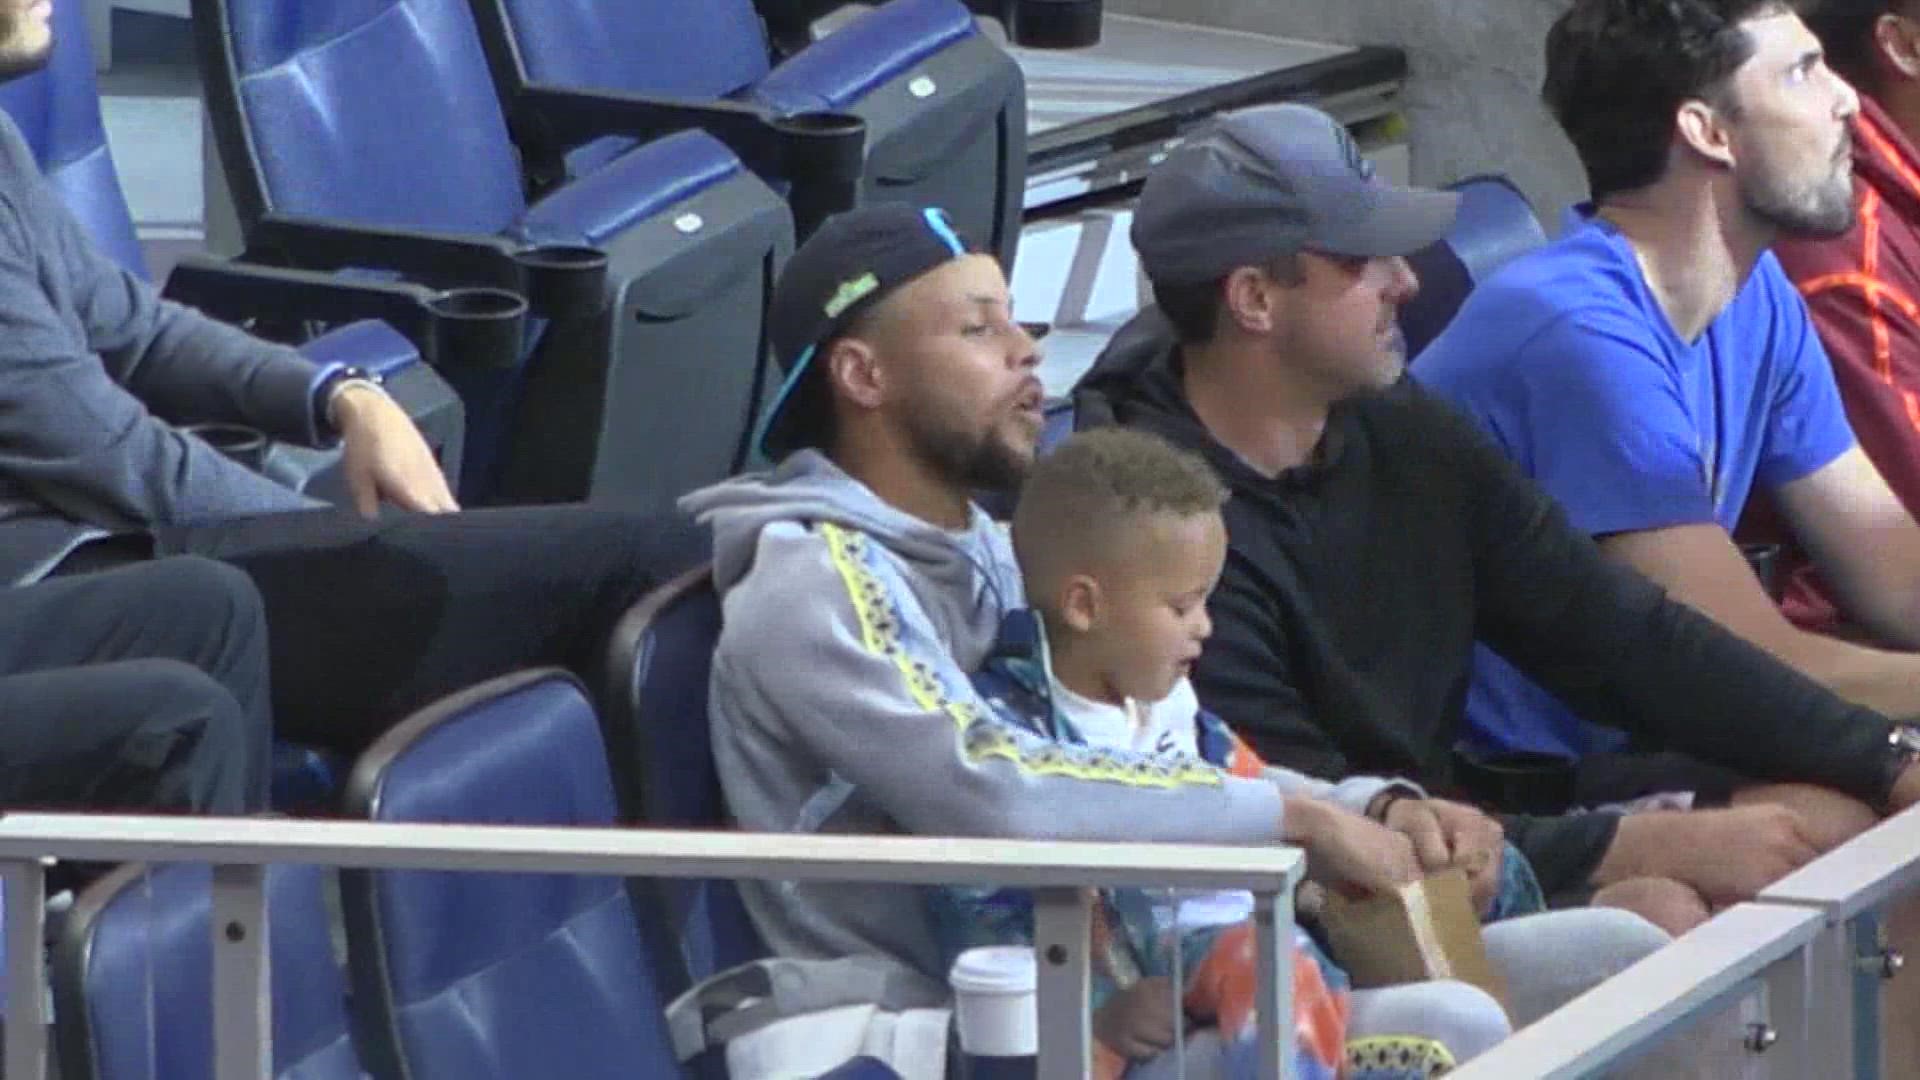 Steph Curry at the Warriors vs Kings game Saturday, sitting in the crowd with his son. He even gets his son to toss a shirt into the fans.